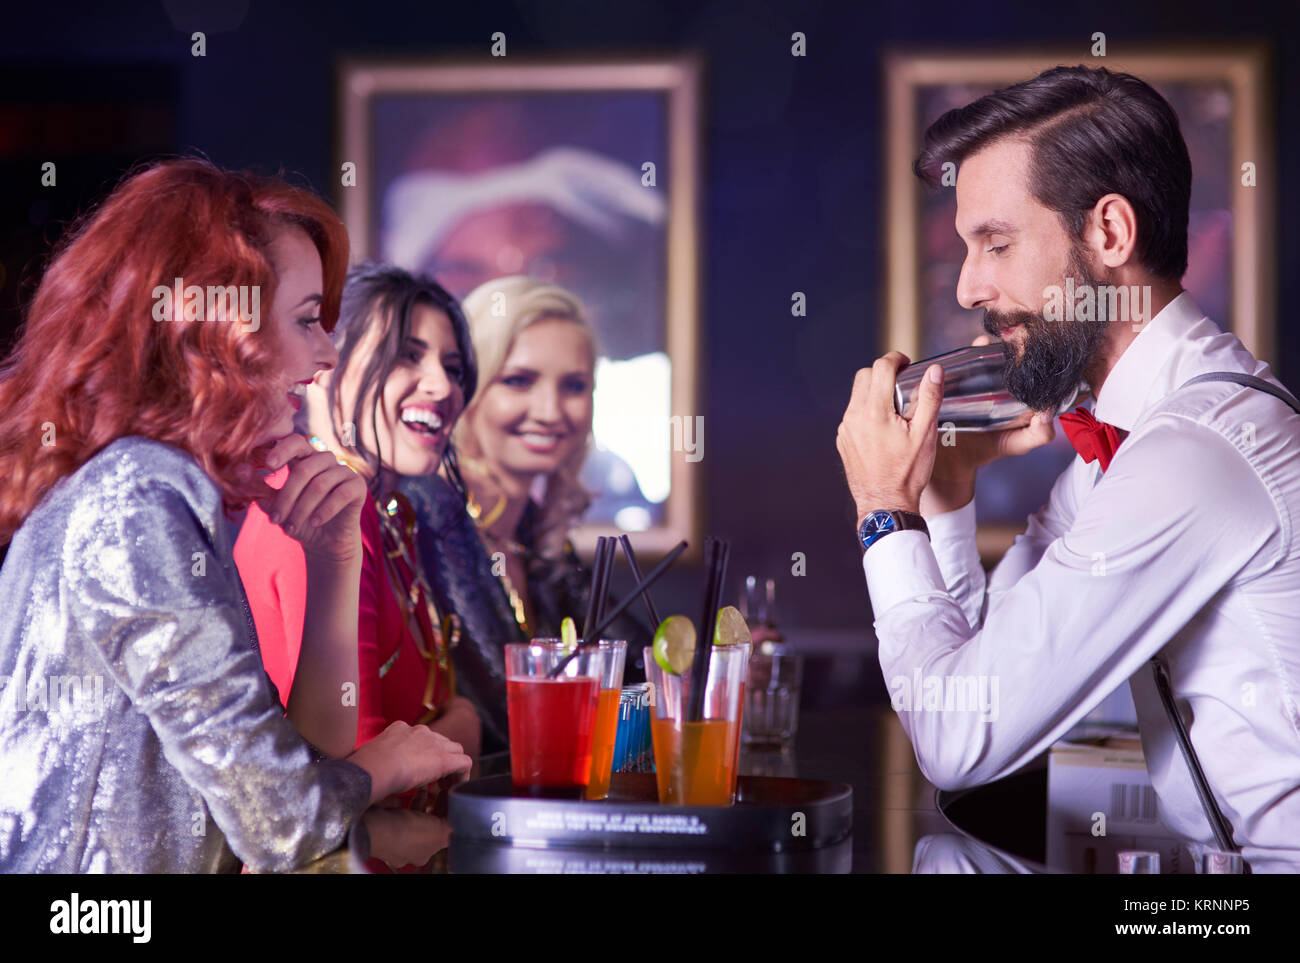 Bartender and attractive women at bar counter Stock Photo